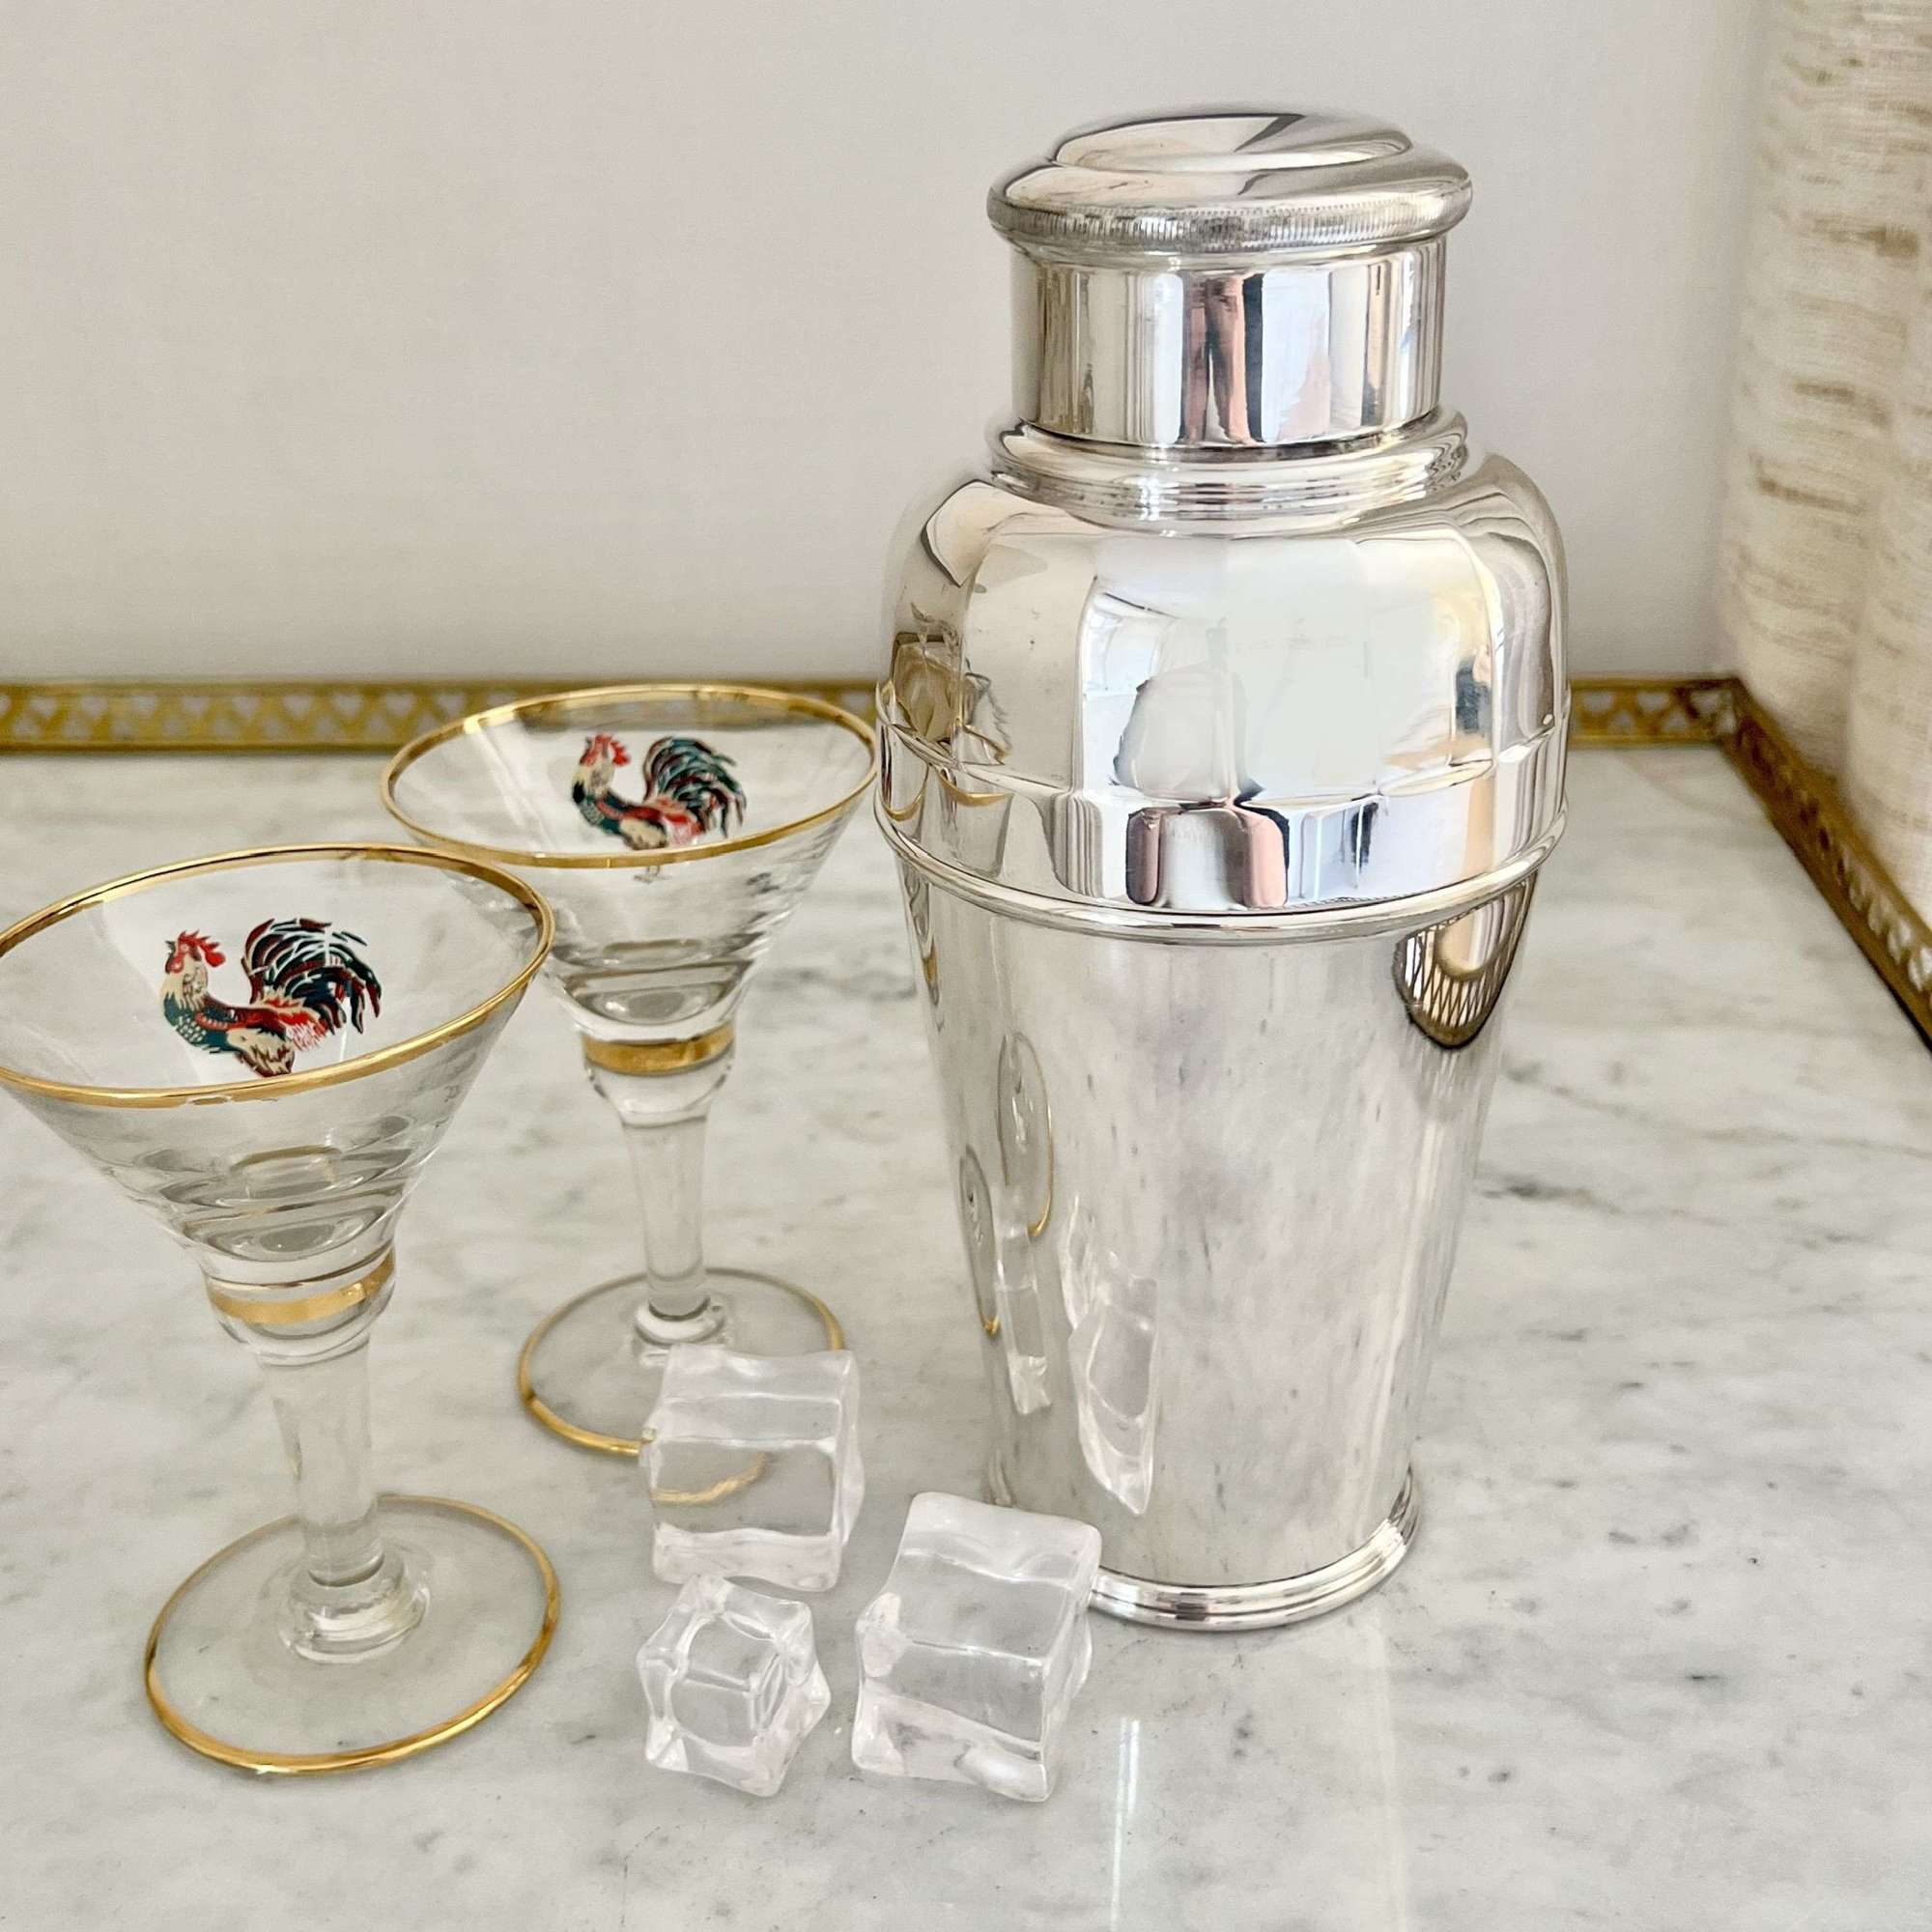 Excellent Art Deco English Silver Plated Cocktail Shaker Circa 1930s